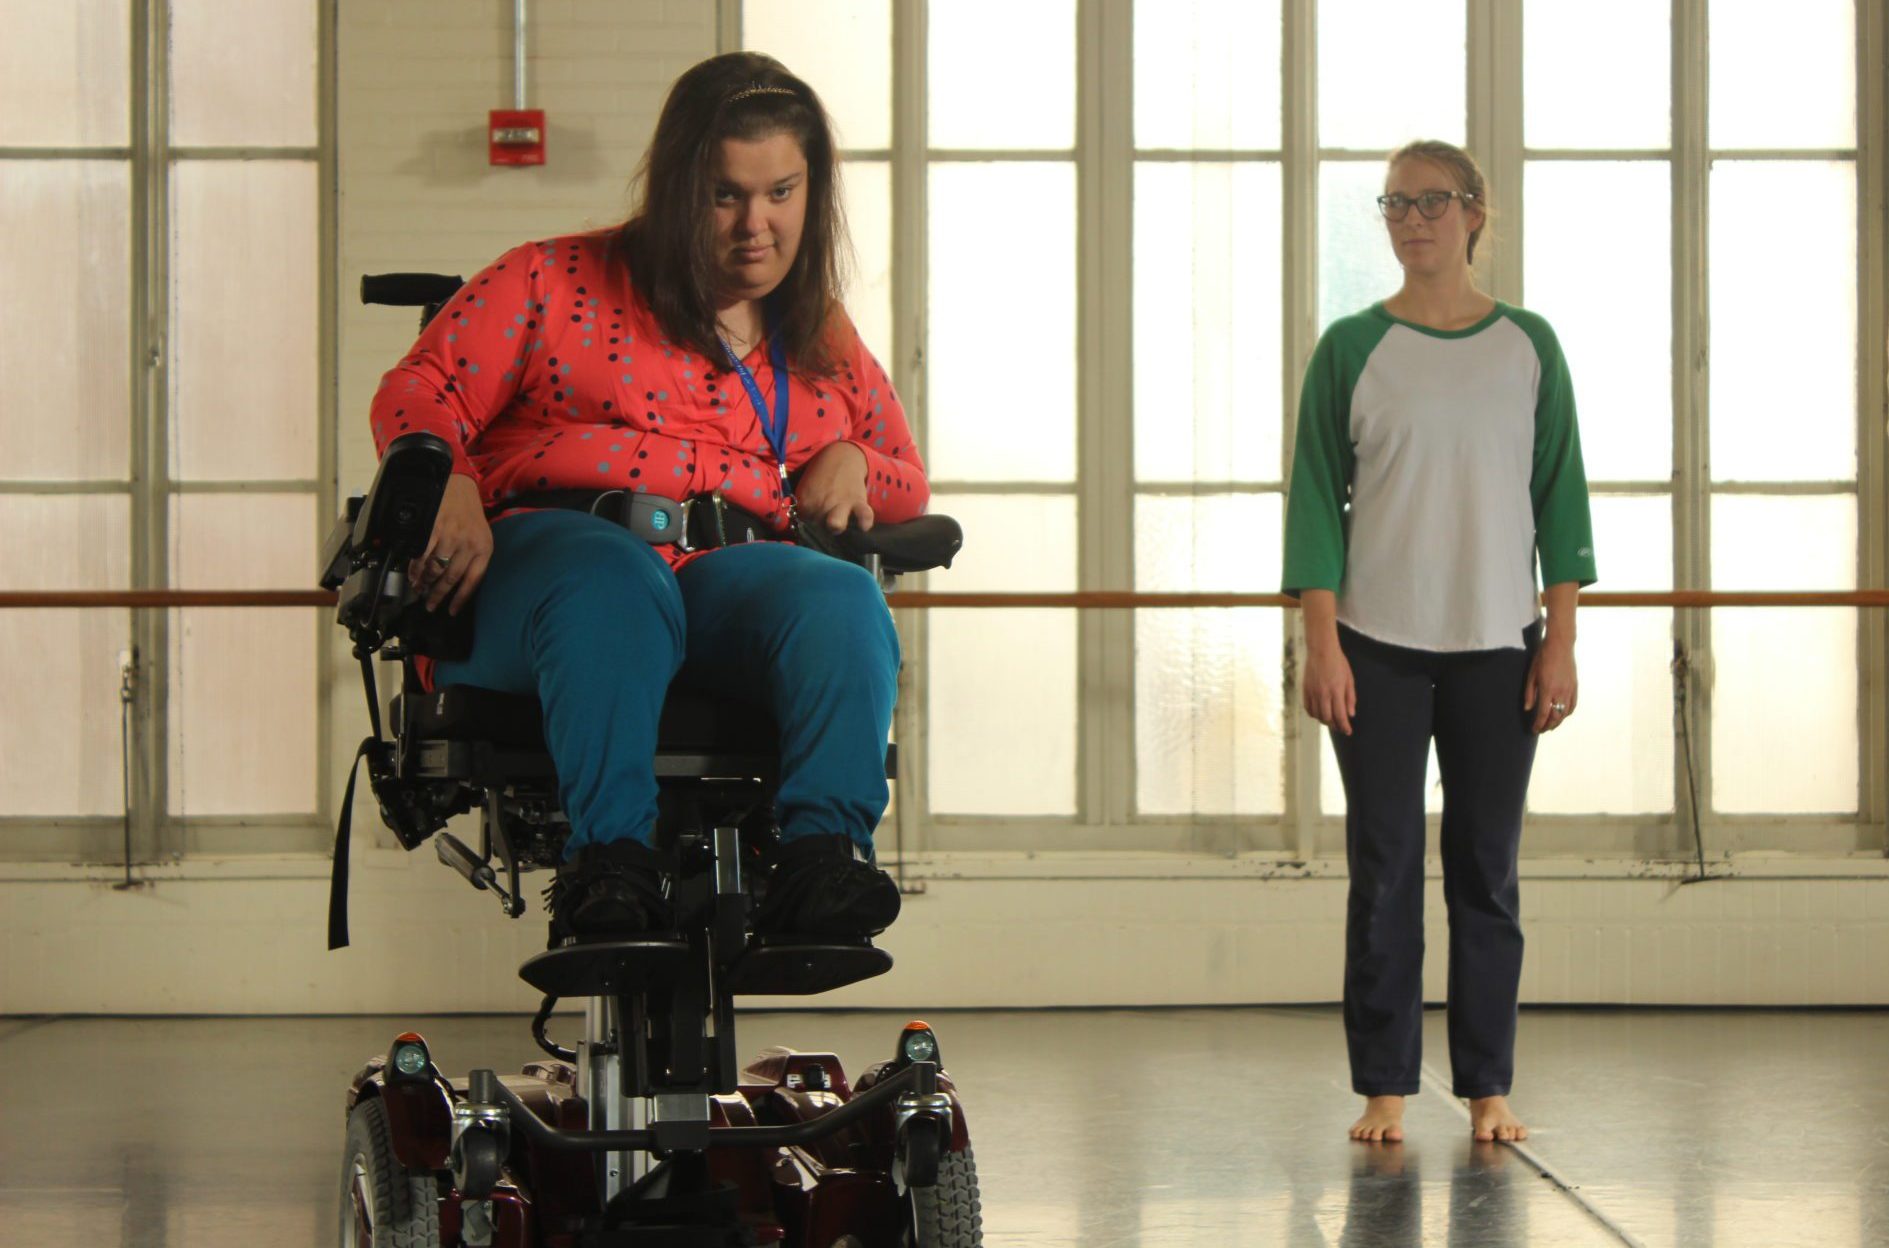 two dancers with and without disabilities face the camera.